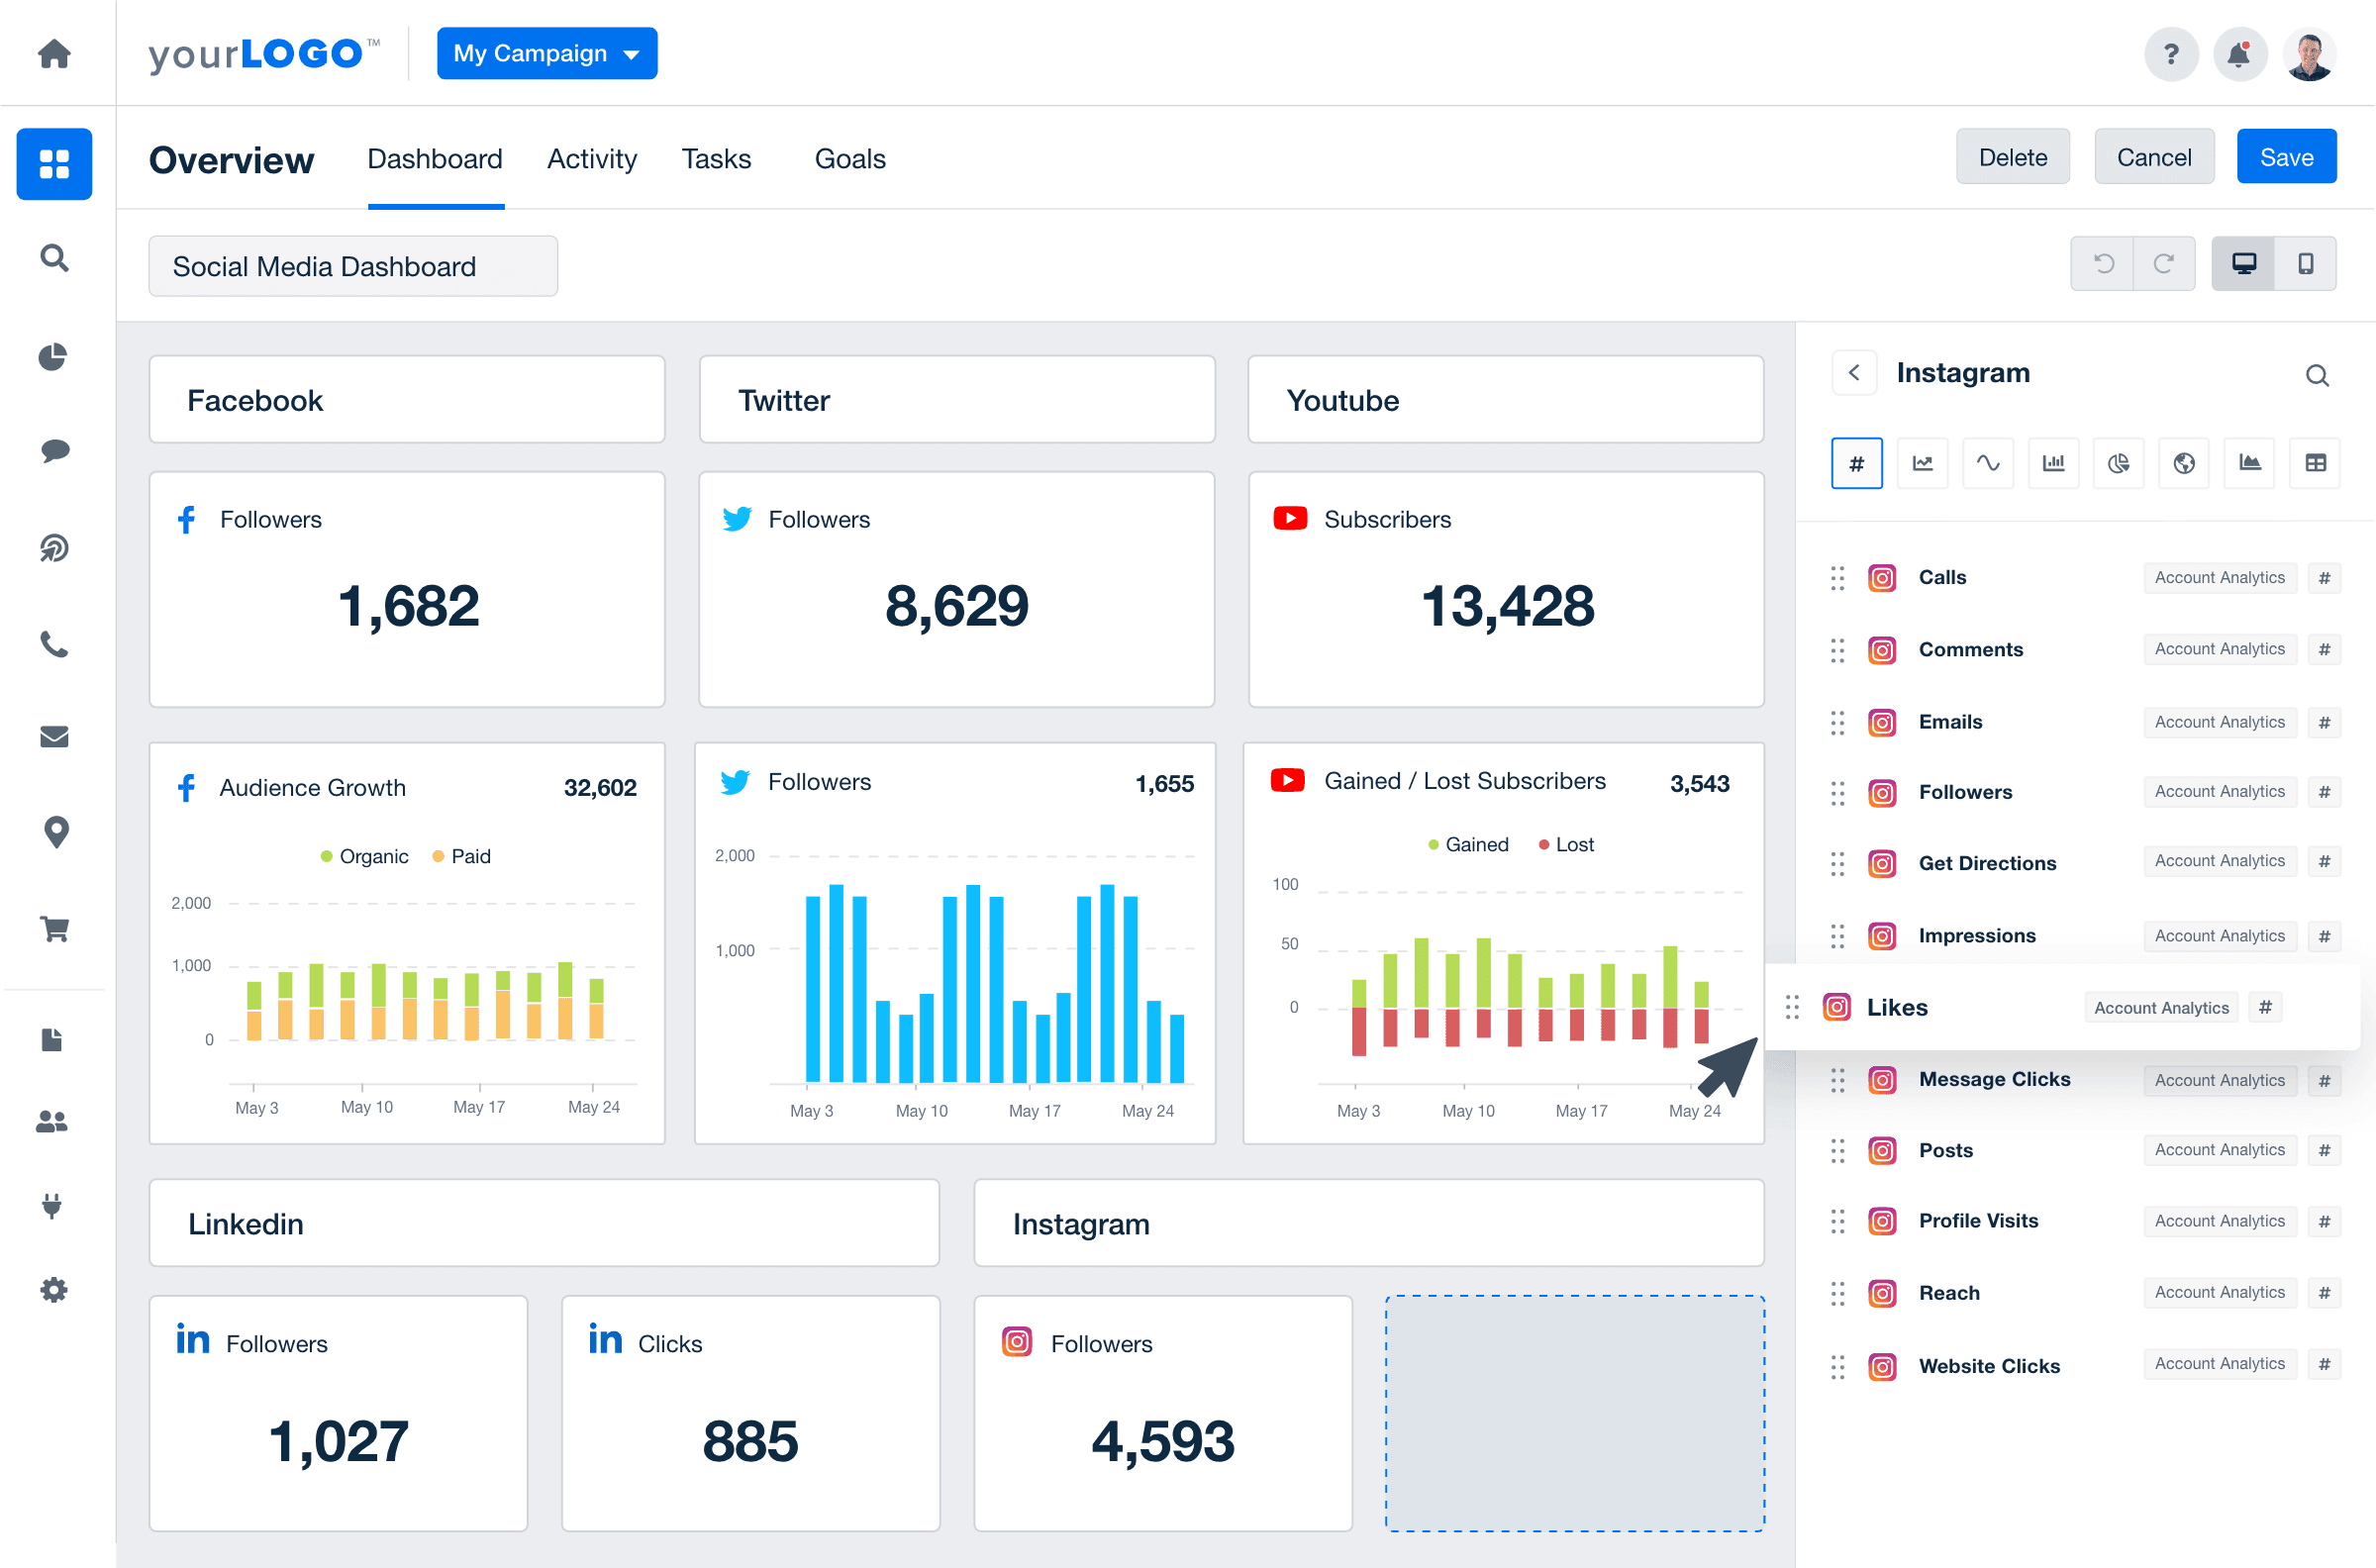 Tailor-Made Client Dashboards That Align With Your Vision